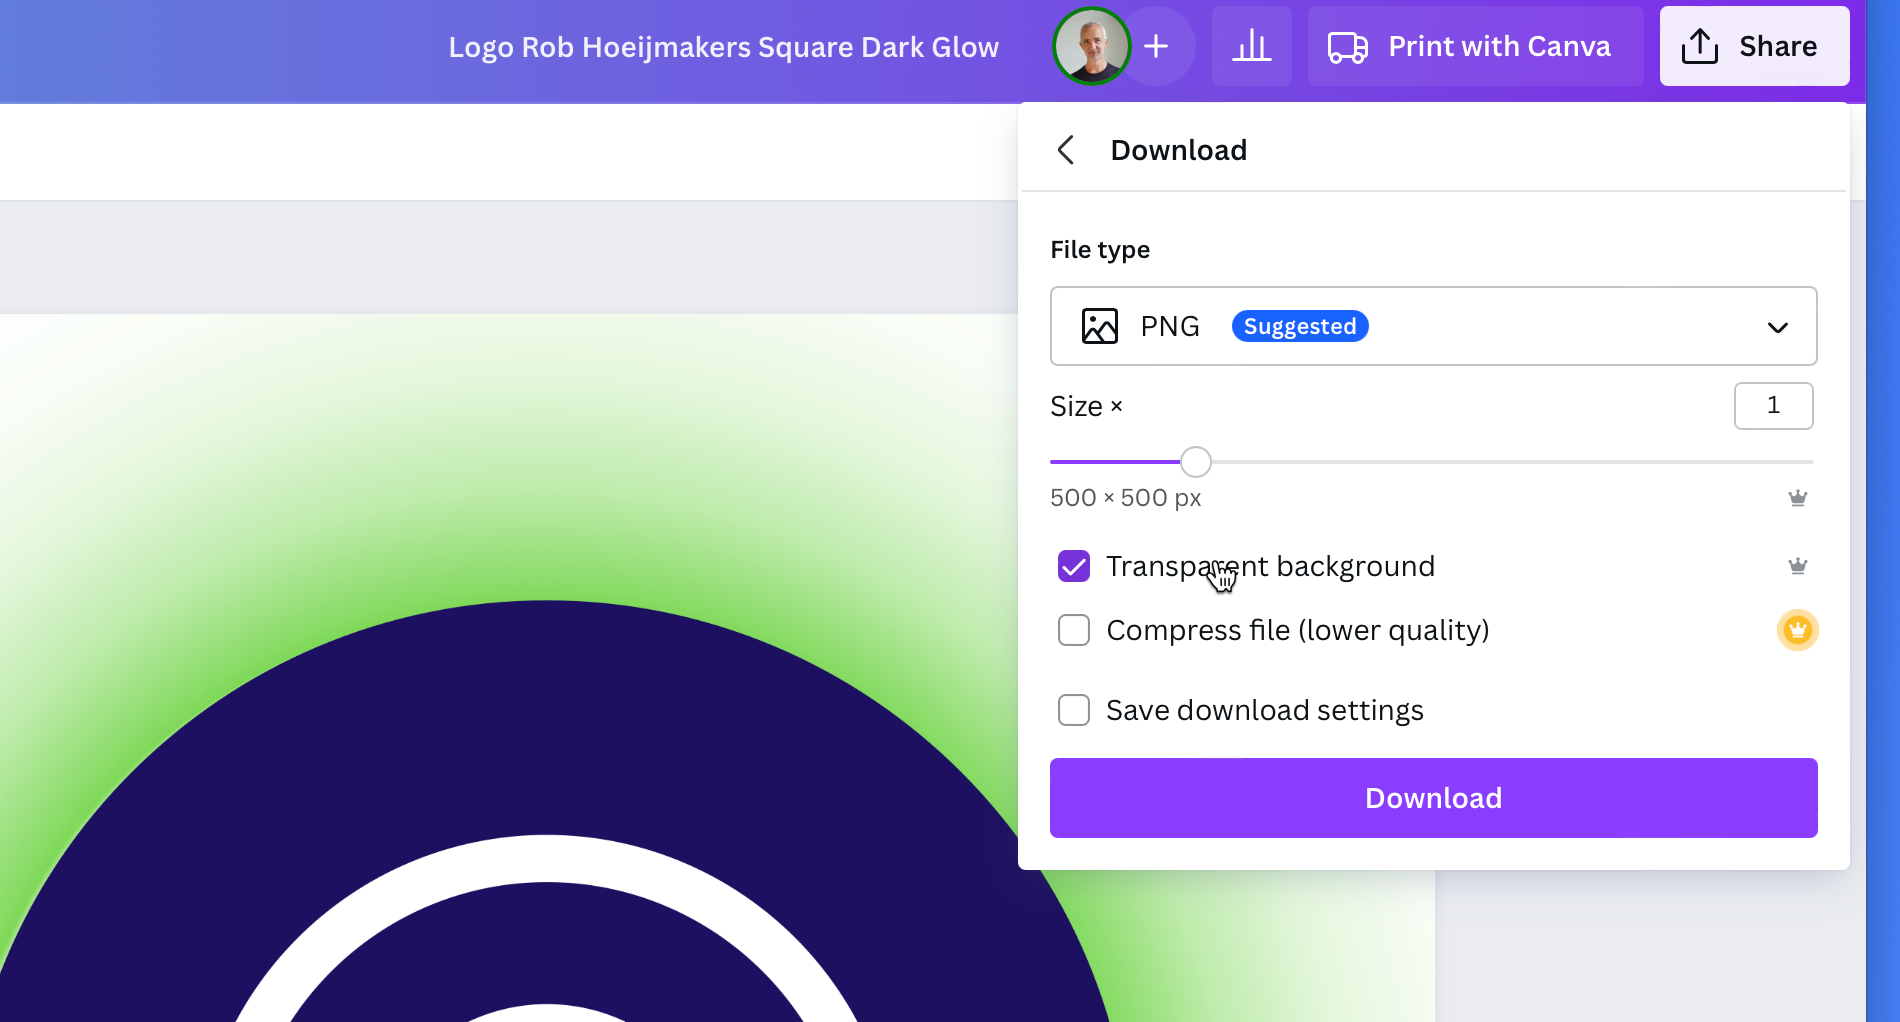 In Canva you can save a design in PNG or SVG and opt for transparent background.